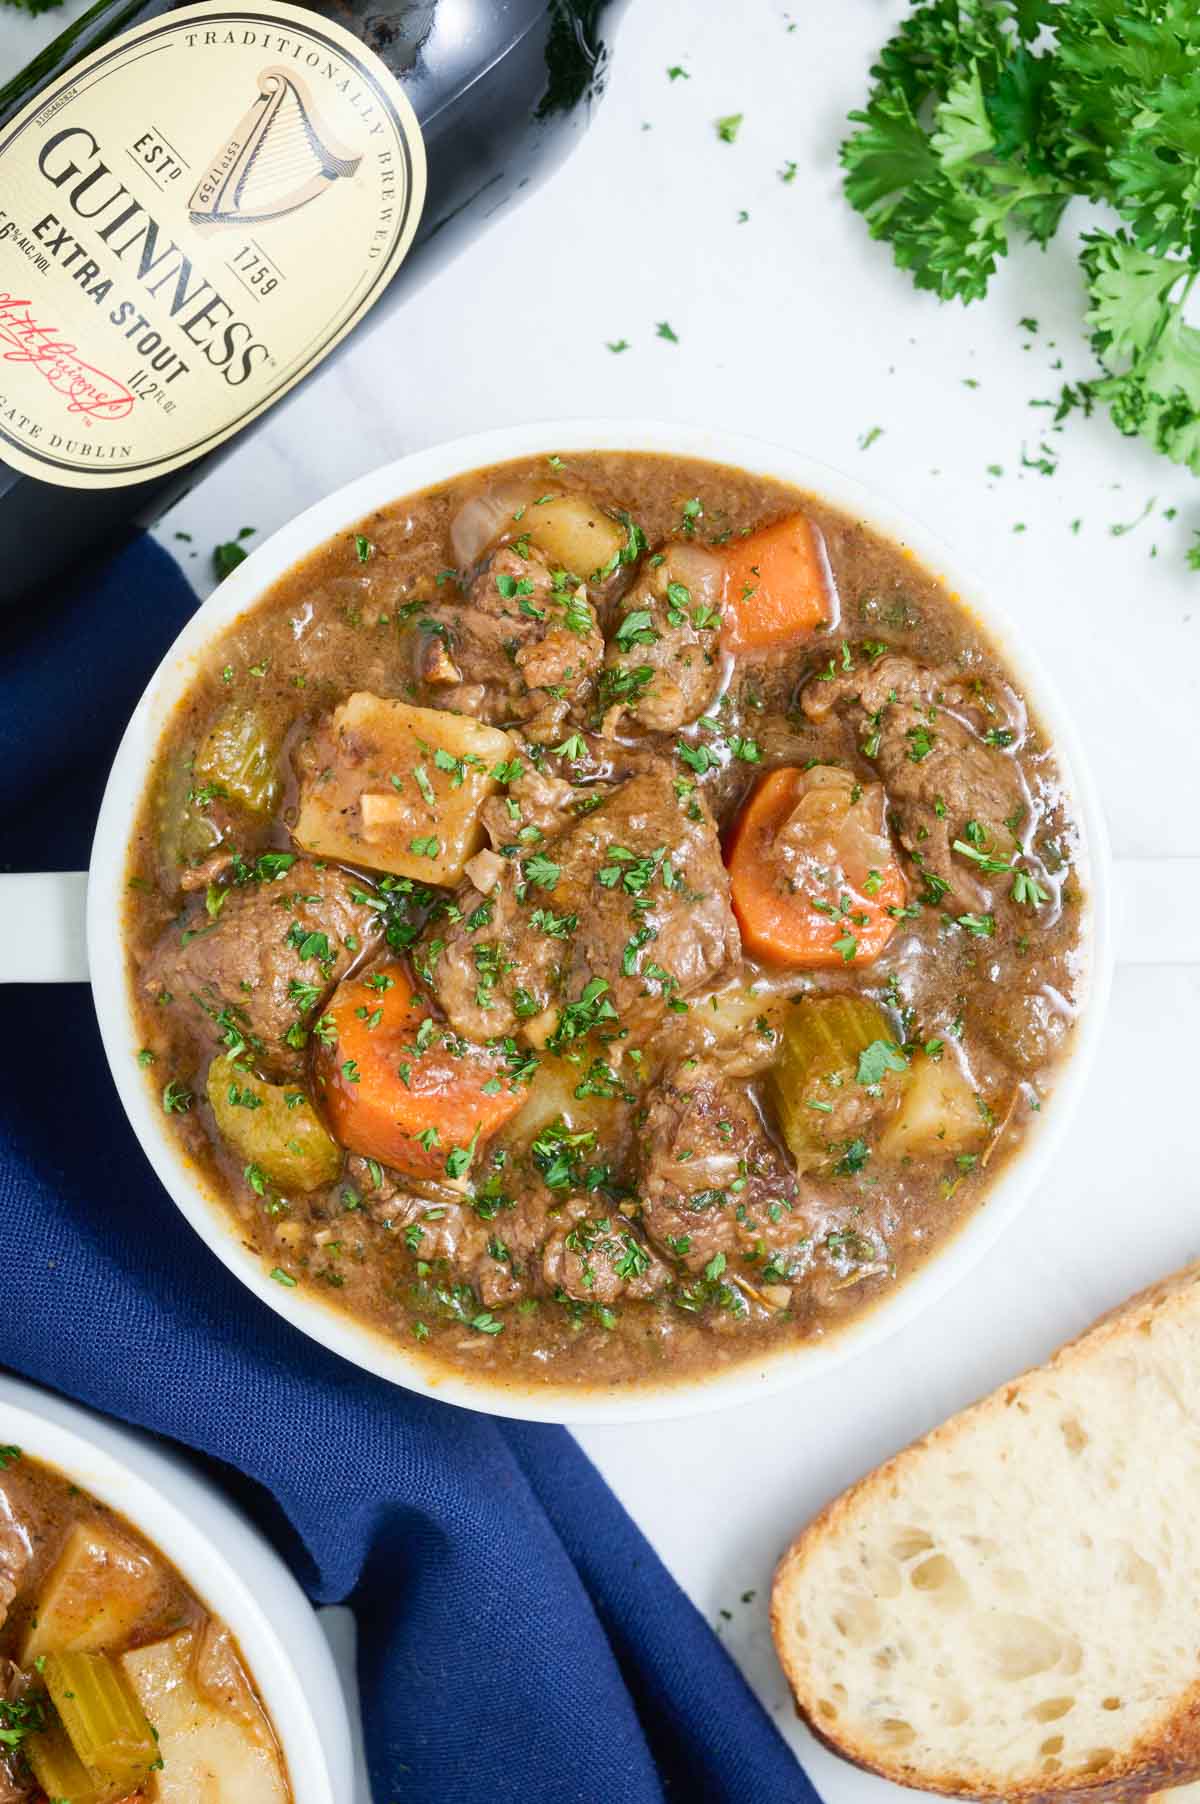 Irish beef stew is a hearty and flavorful meal.